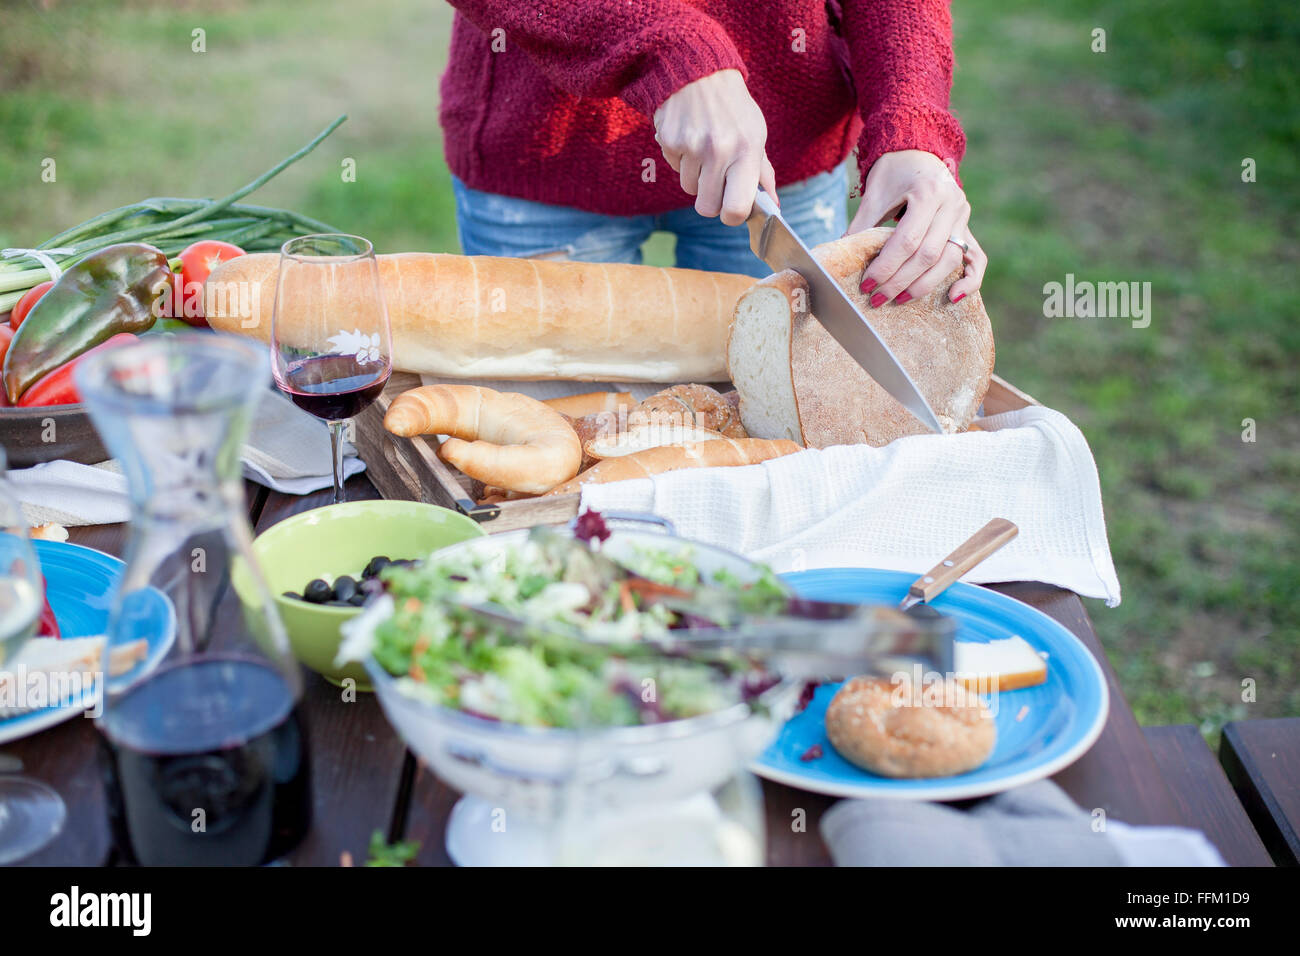 Person on garden party slicing loaf of bread Stock Photo